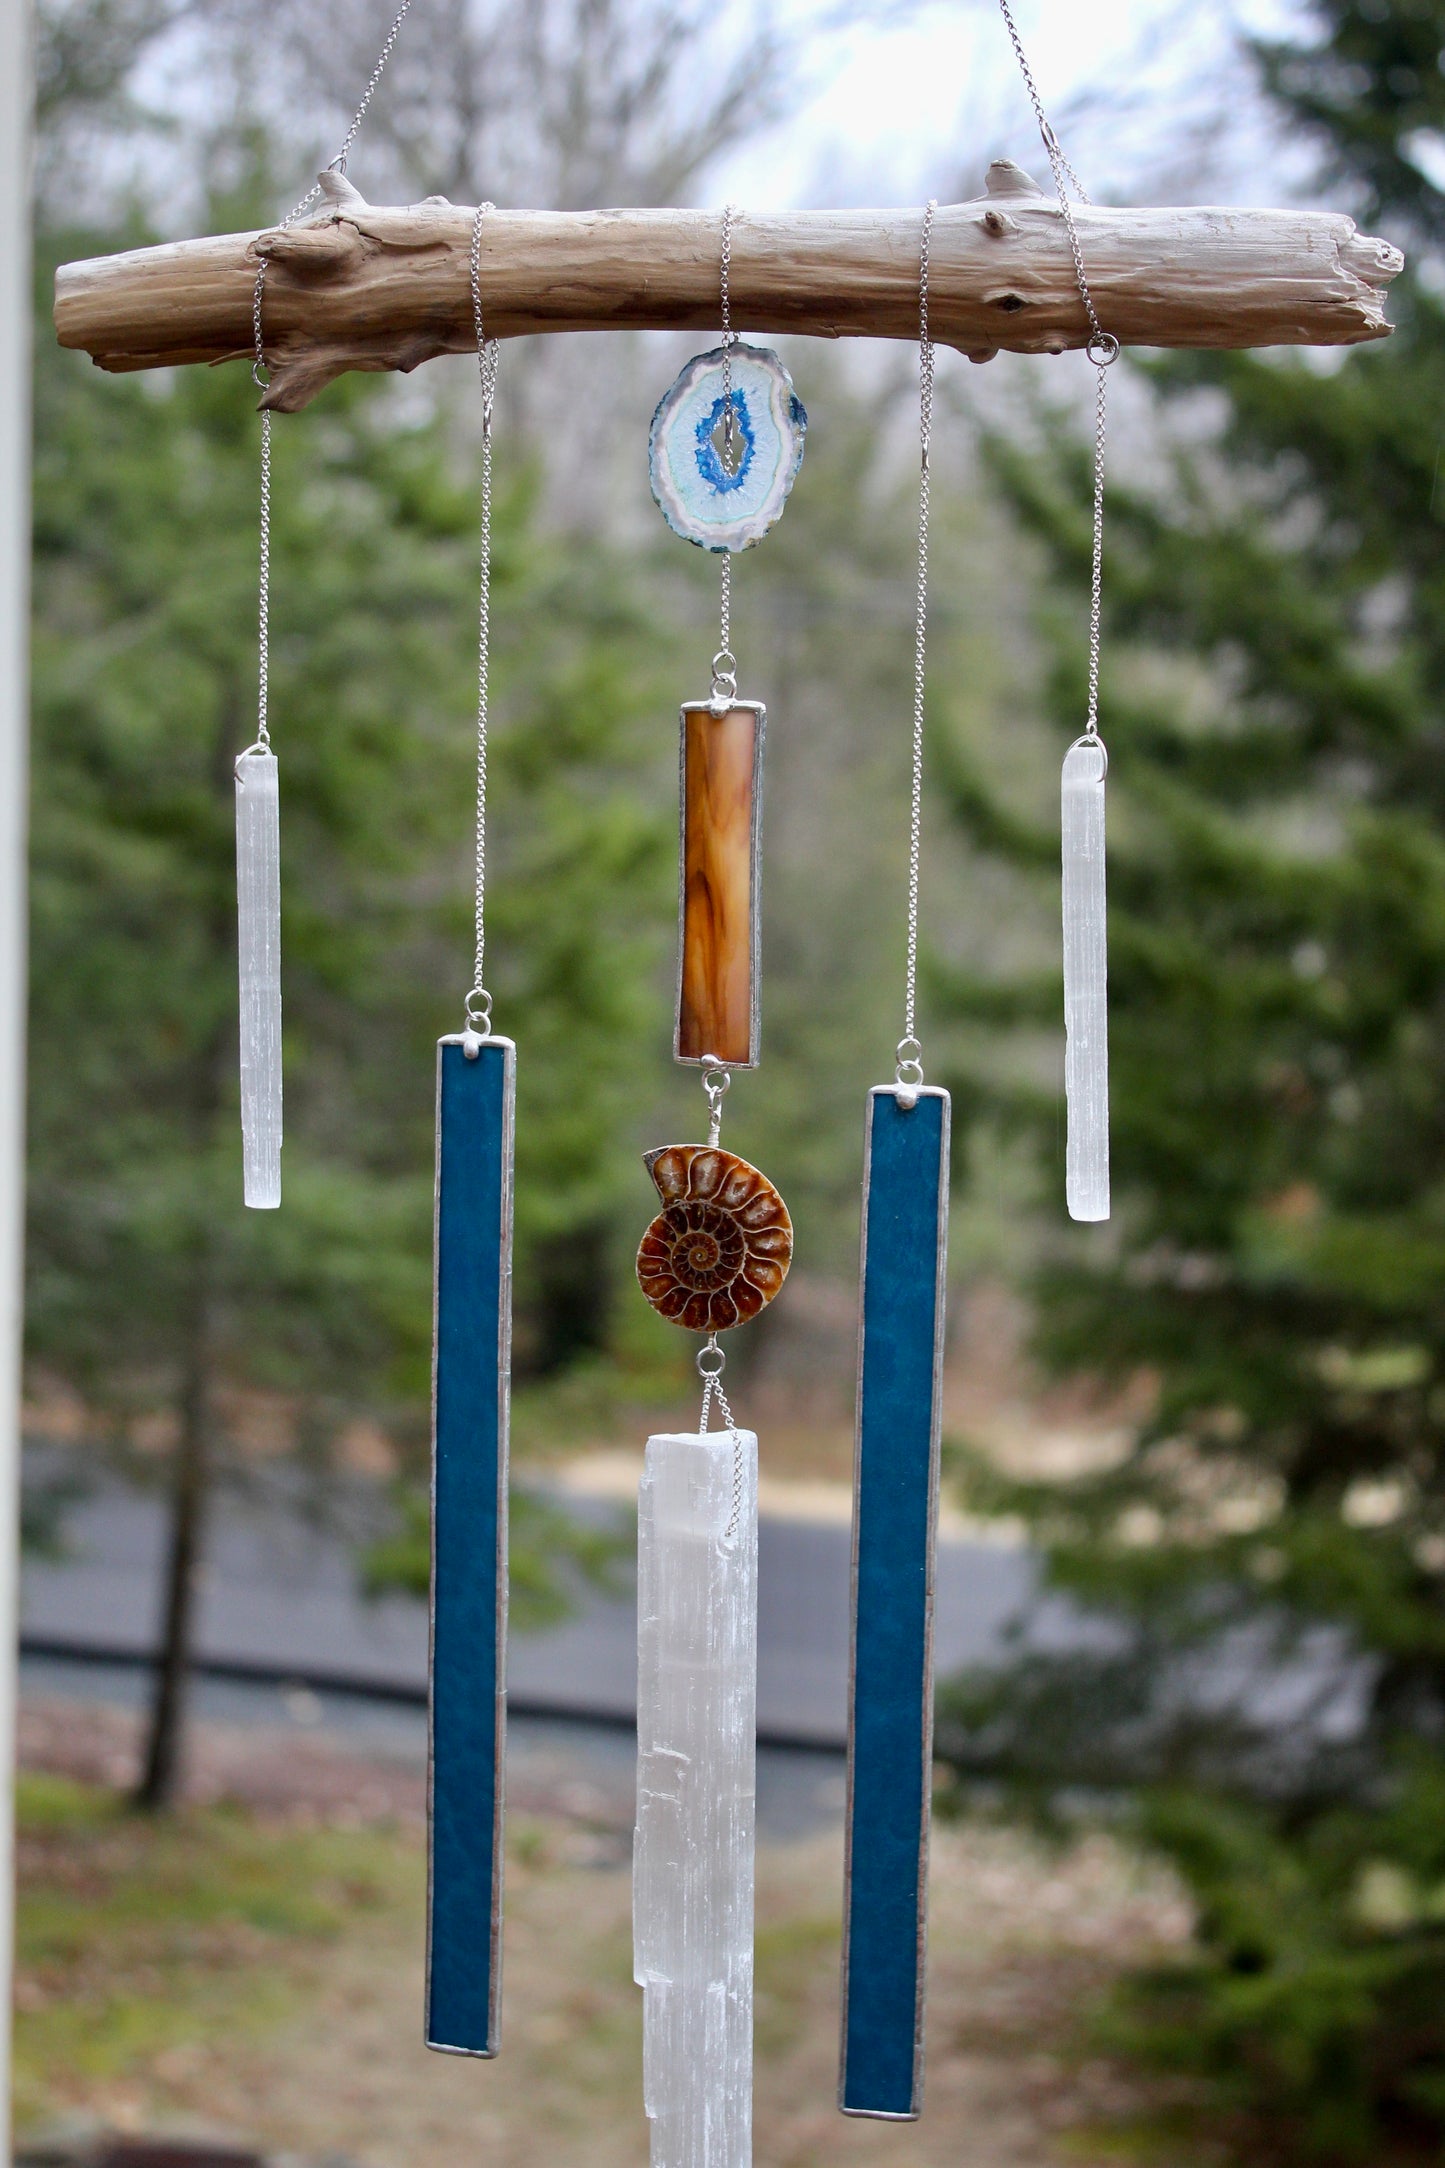 Drift Wood Selenite Stained Glass Mobile with Ammonite